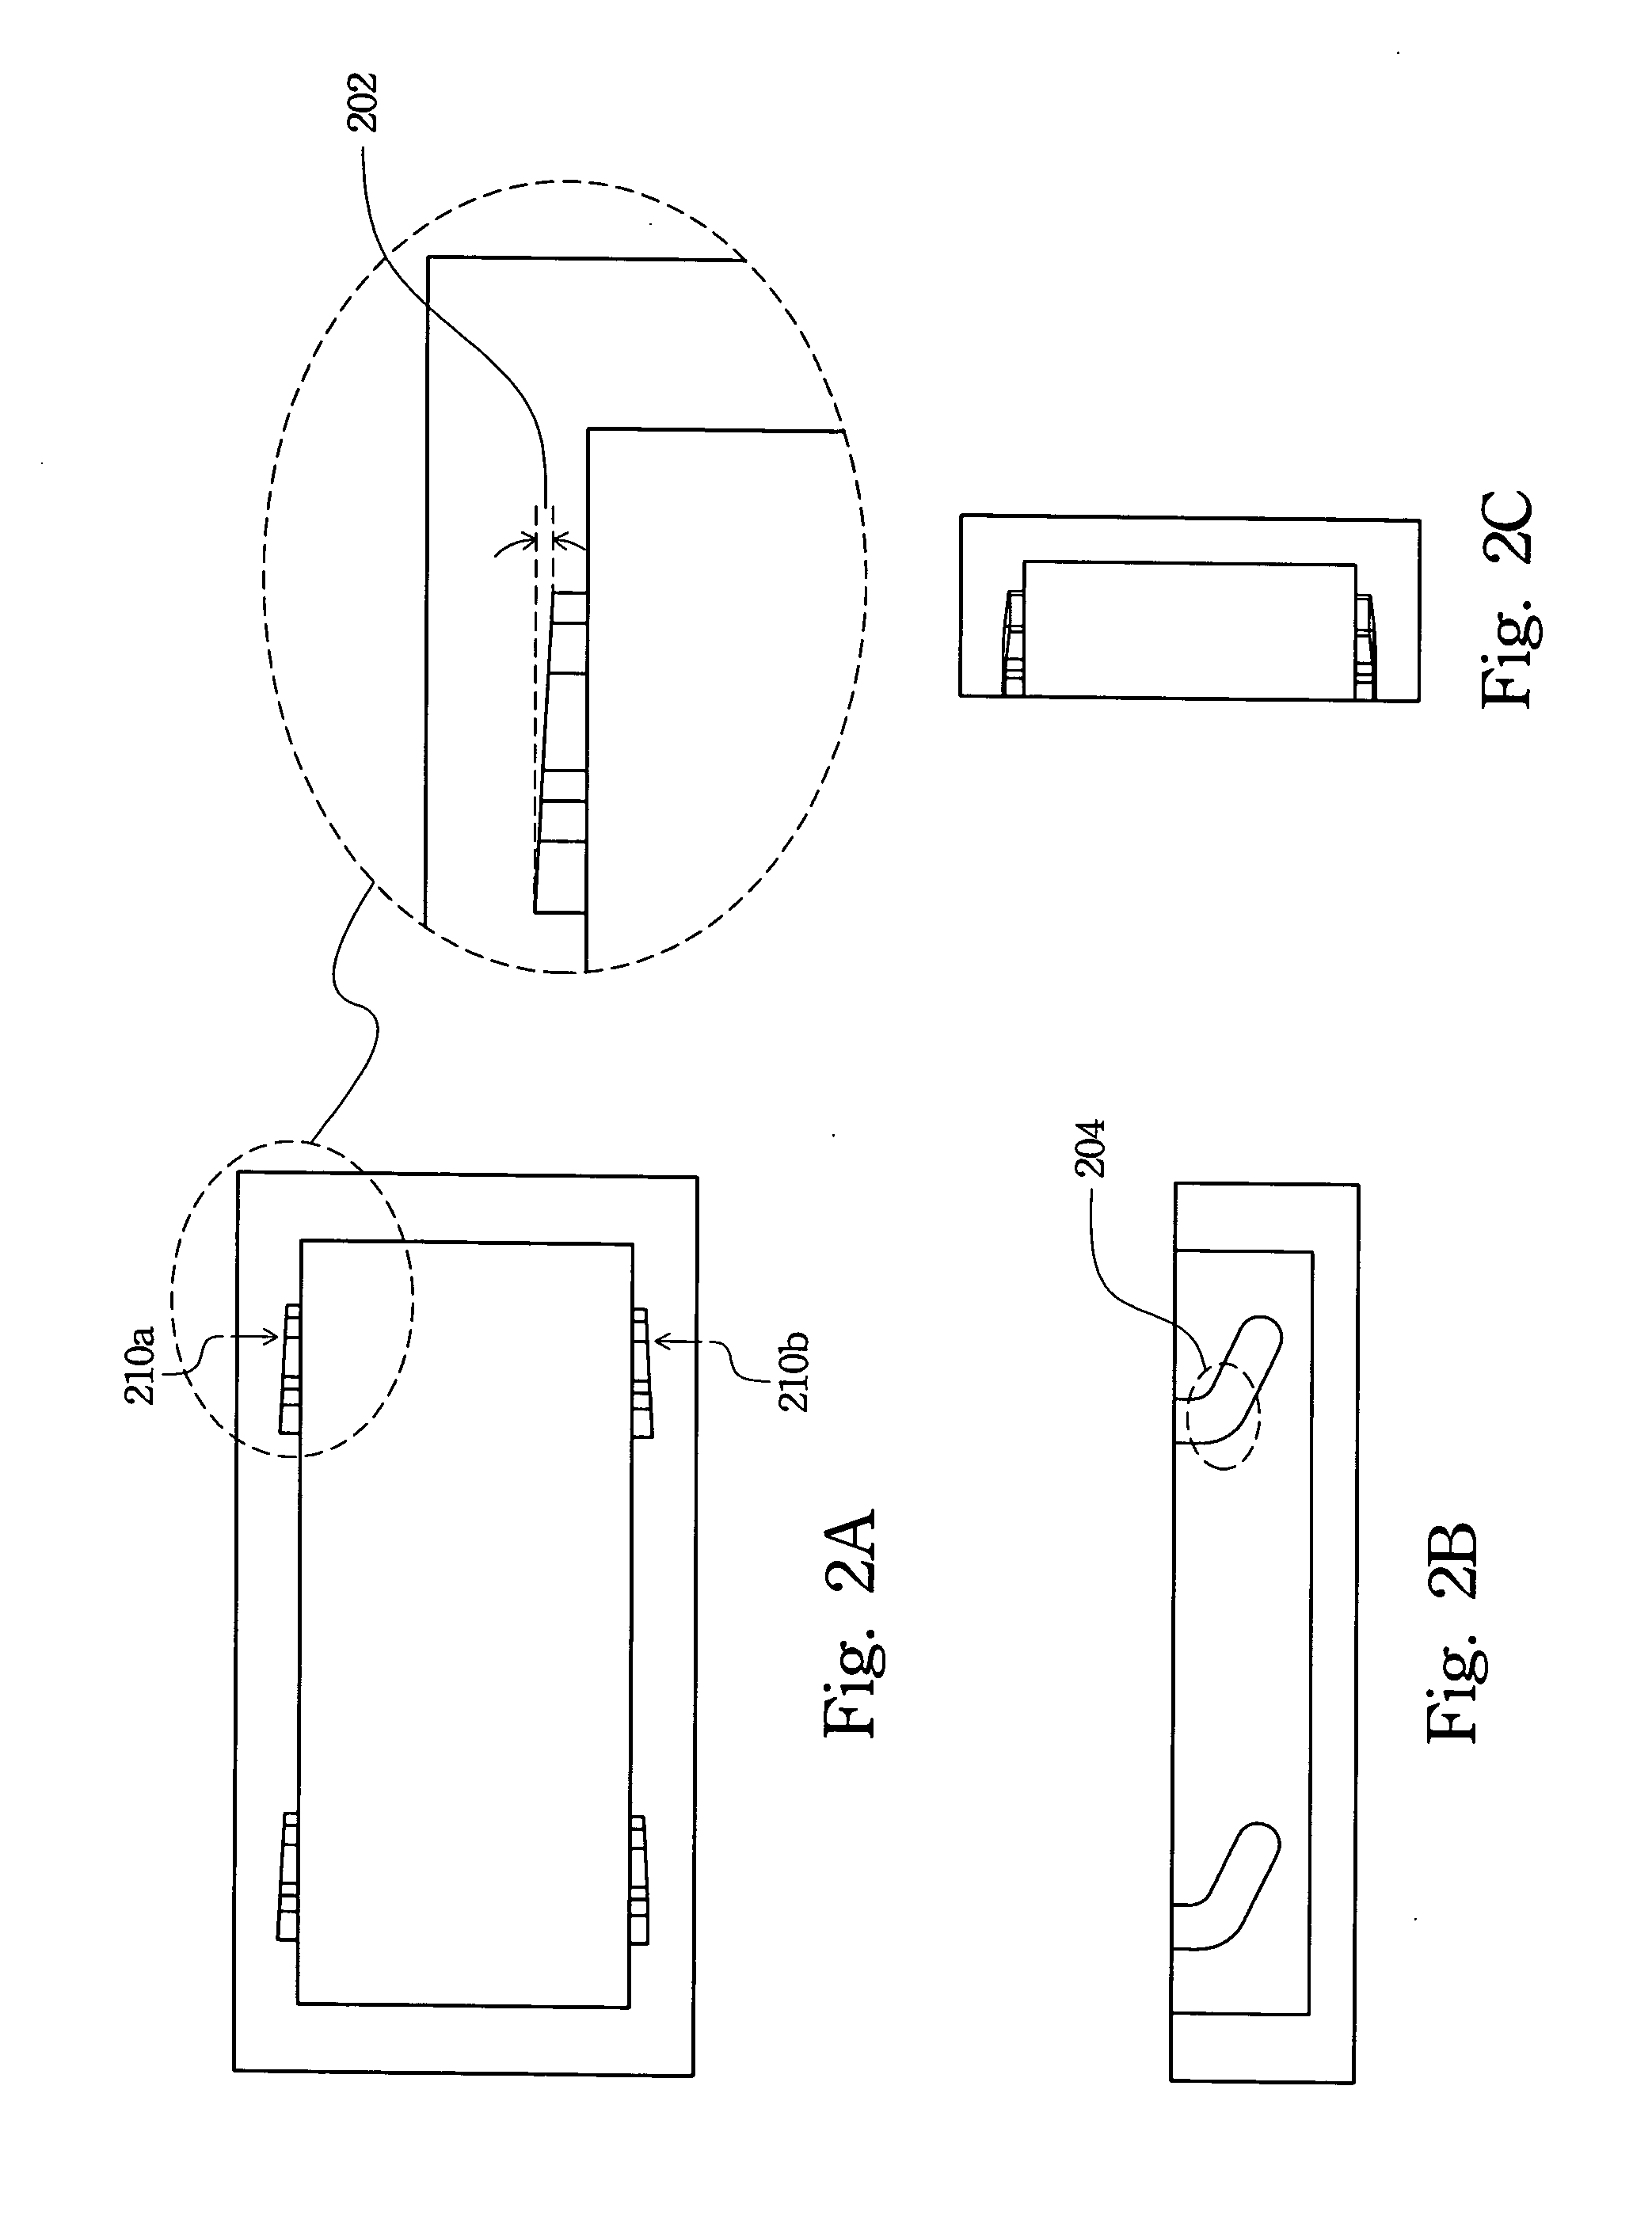 Hard disk drive holding device